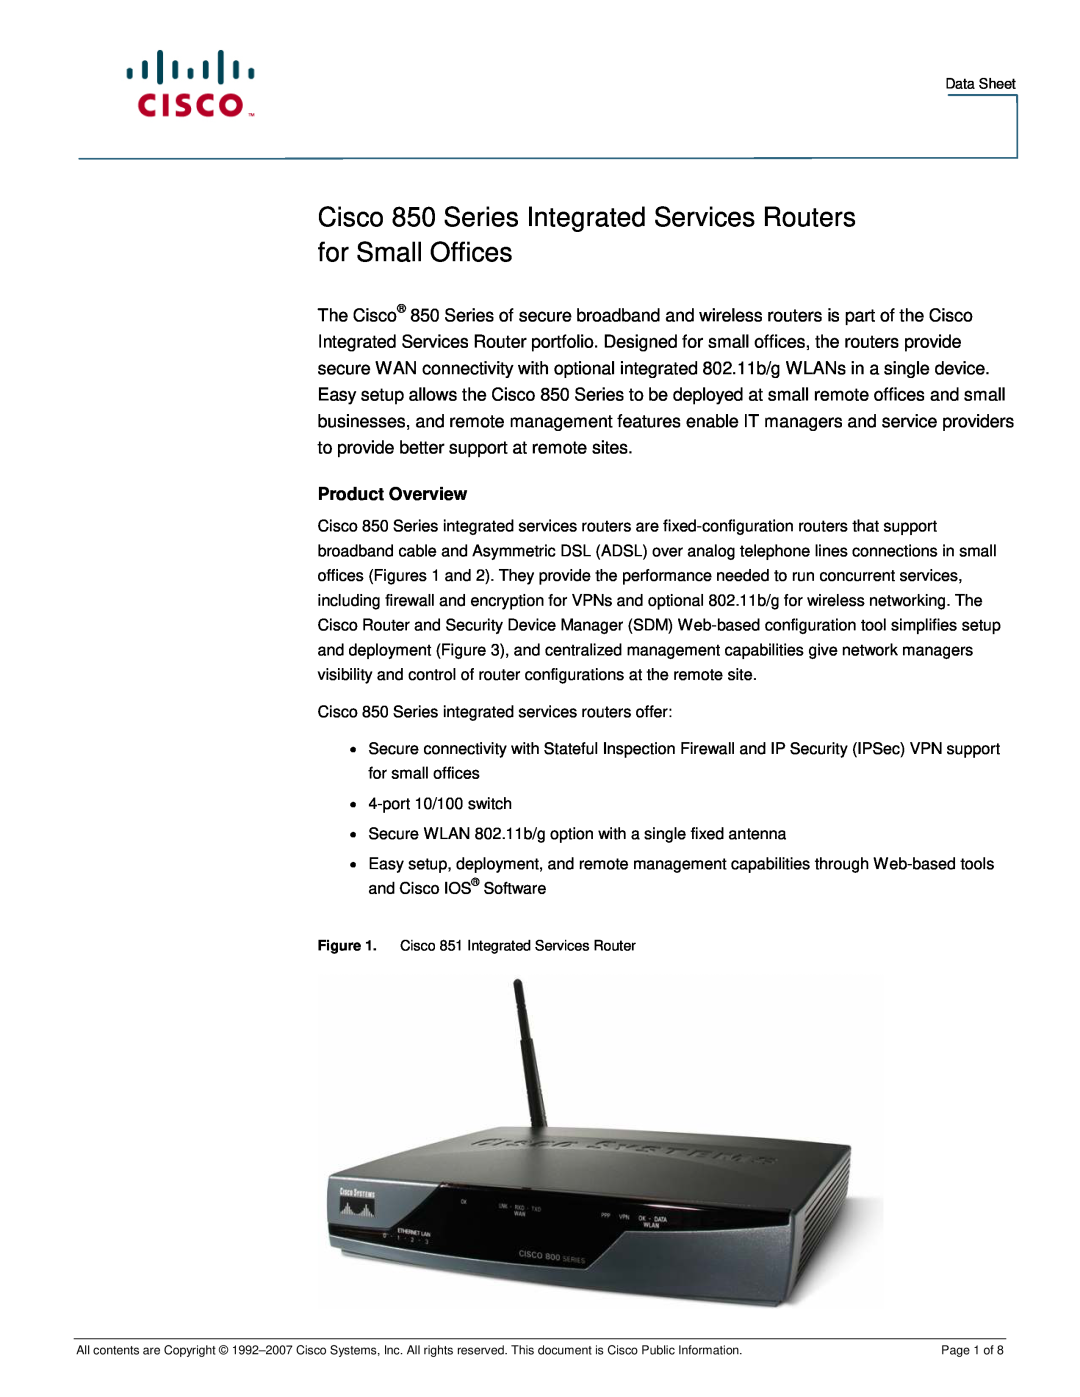 Cisco Systems CISCO851WGEK9RF manual Product Overview, Cisco 850 Series Integrated Services Routers for Small Offices 